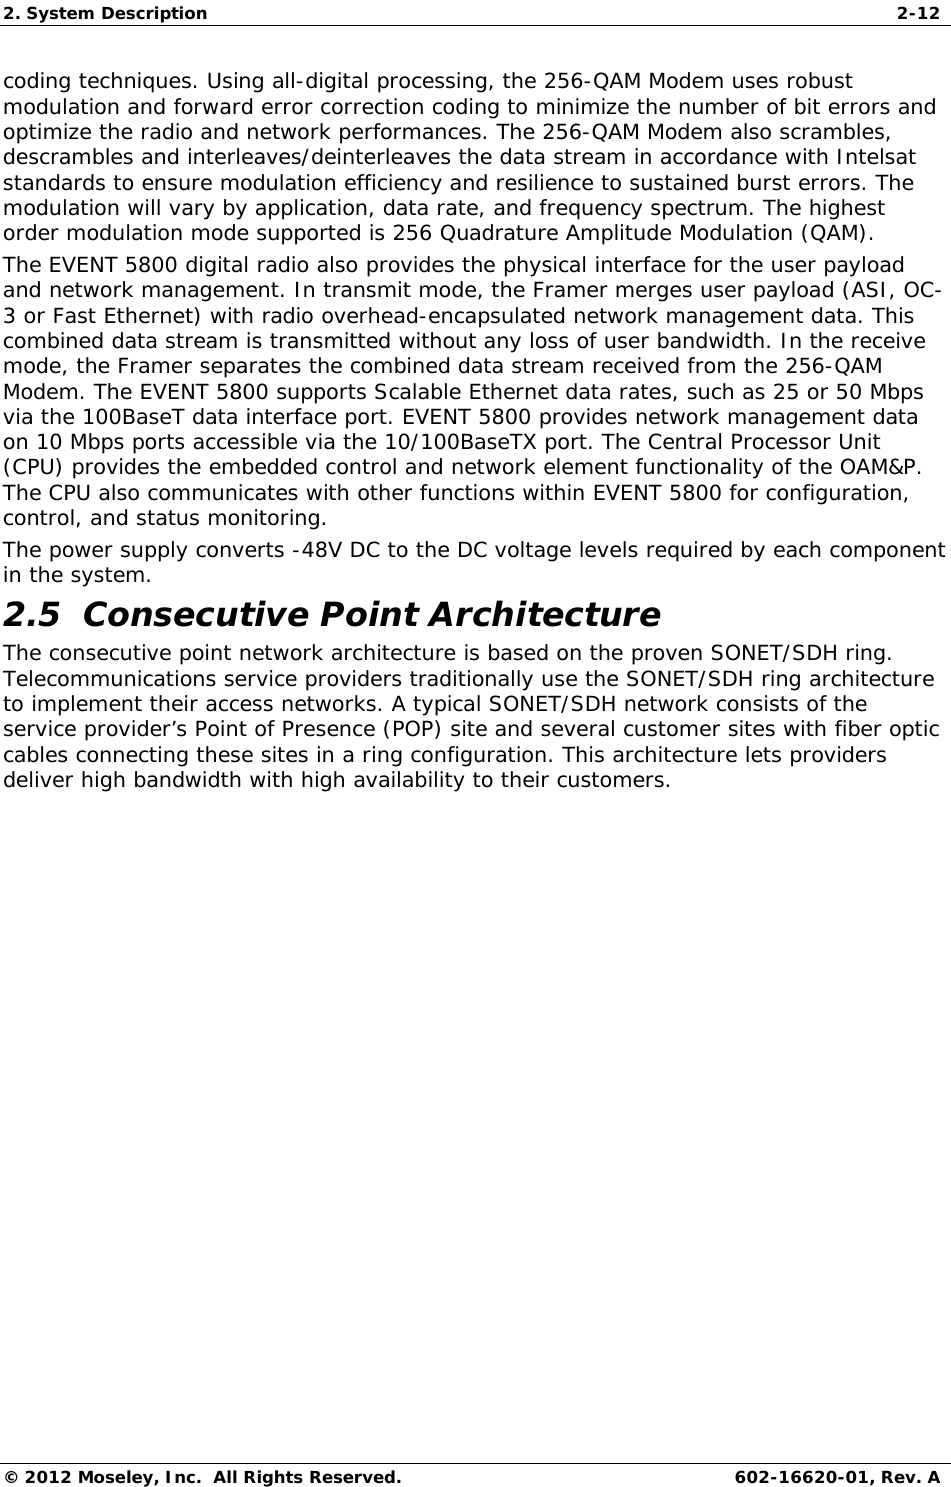 2. System Description  2-12 © 2012 Moseley, Inc.  All Rights Reserved.  602-16620-01, Rev. A coding techniques. Using all-digital processing, the 256-QAM Modem uses robust modulation and forward error correction coding to minimize the number of bit errors and optimize the radio and network performances. The 256-QAM Modem also scrambles, descrambles and interleaves/deinterleaves the data stream in accordance with Intelsat standards to ensure modulation efficiency and resilience to sustained burst errors. The modulation will vary by application, data rate, and frequency spectrum. The highest order modulation mode supported is 256 Quadrature Amplitude Modulation (QAM).  The EVENT 5800 digital radio also provides the physical interface for the user payload and network management. In transmit mode, the Framer merges user payload (ASI, OC-3 or Fast Ethernet) with radio overhead-encapsulated network management data. This combined data stream is transmitted without any loss of user bandwidth. In the receive mode, the Framer separates the combined data stream received from the 256-QAM Modem. The EVENT 5800 supports Scalable Ethernet data rates, such as 25 or 50 Mbps via the 100BaseT data interface port. EVENT 5800 provides network management data on 10 Mbps ports accessible via the 10/100BaseTX port. The Central Processor Unit (CPU) provides the embedded control and network element functionality of the OAM&amp;P. The CPU also communicates with other functions within EVENT 5800 for configuration, control, and status monitoring.  The power supply converts -48V DC to the DC voltage levels required by each component in the system.  2.5  Consecutive Point Architecture The consecutive point network architecture is based on the proven SONET/SDH ring. Telecommunications service providers traditionally use the SONET/SDH ring architecture to implement their access networks. A typical SONET/SDH network consists of the service provider’s Point of Presence (POP) site and several customer sites with fiber optic cables connecting these sites in a ring configuration. This architecture lets providers deliver high bandwidth with high availability to their customers. 